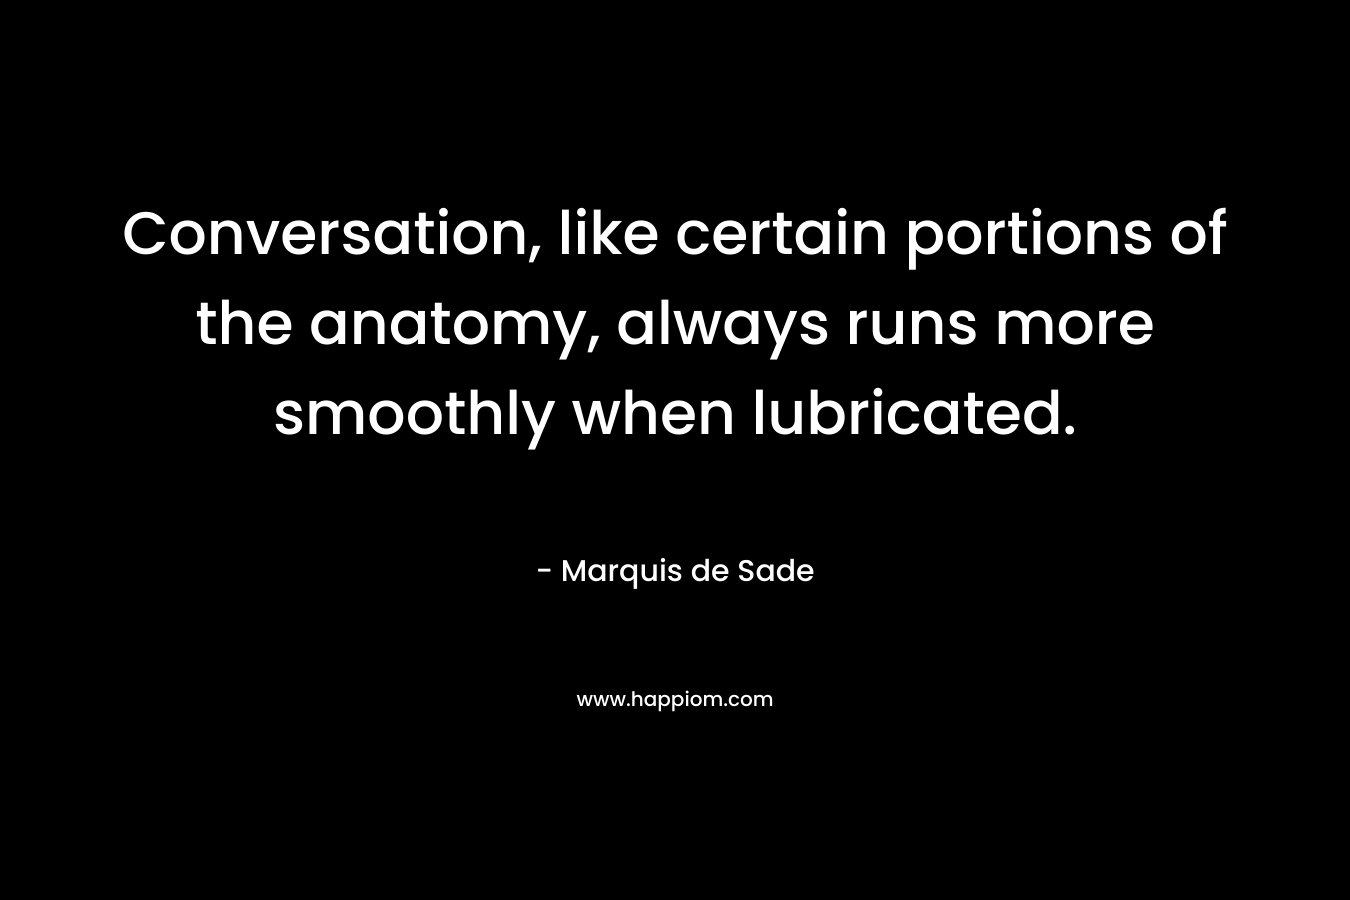 Conversation, like certain portions of the anatomy, always runs more smoothly when lubricated.